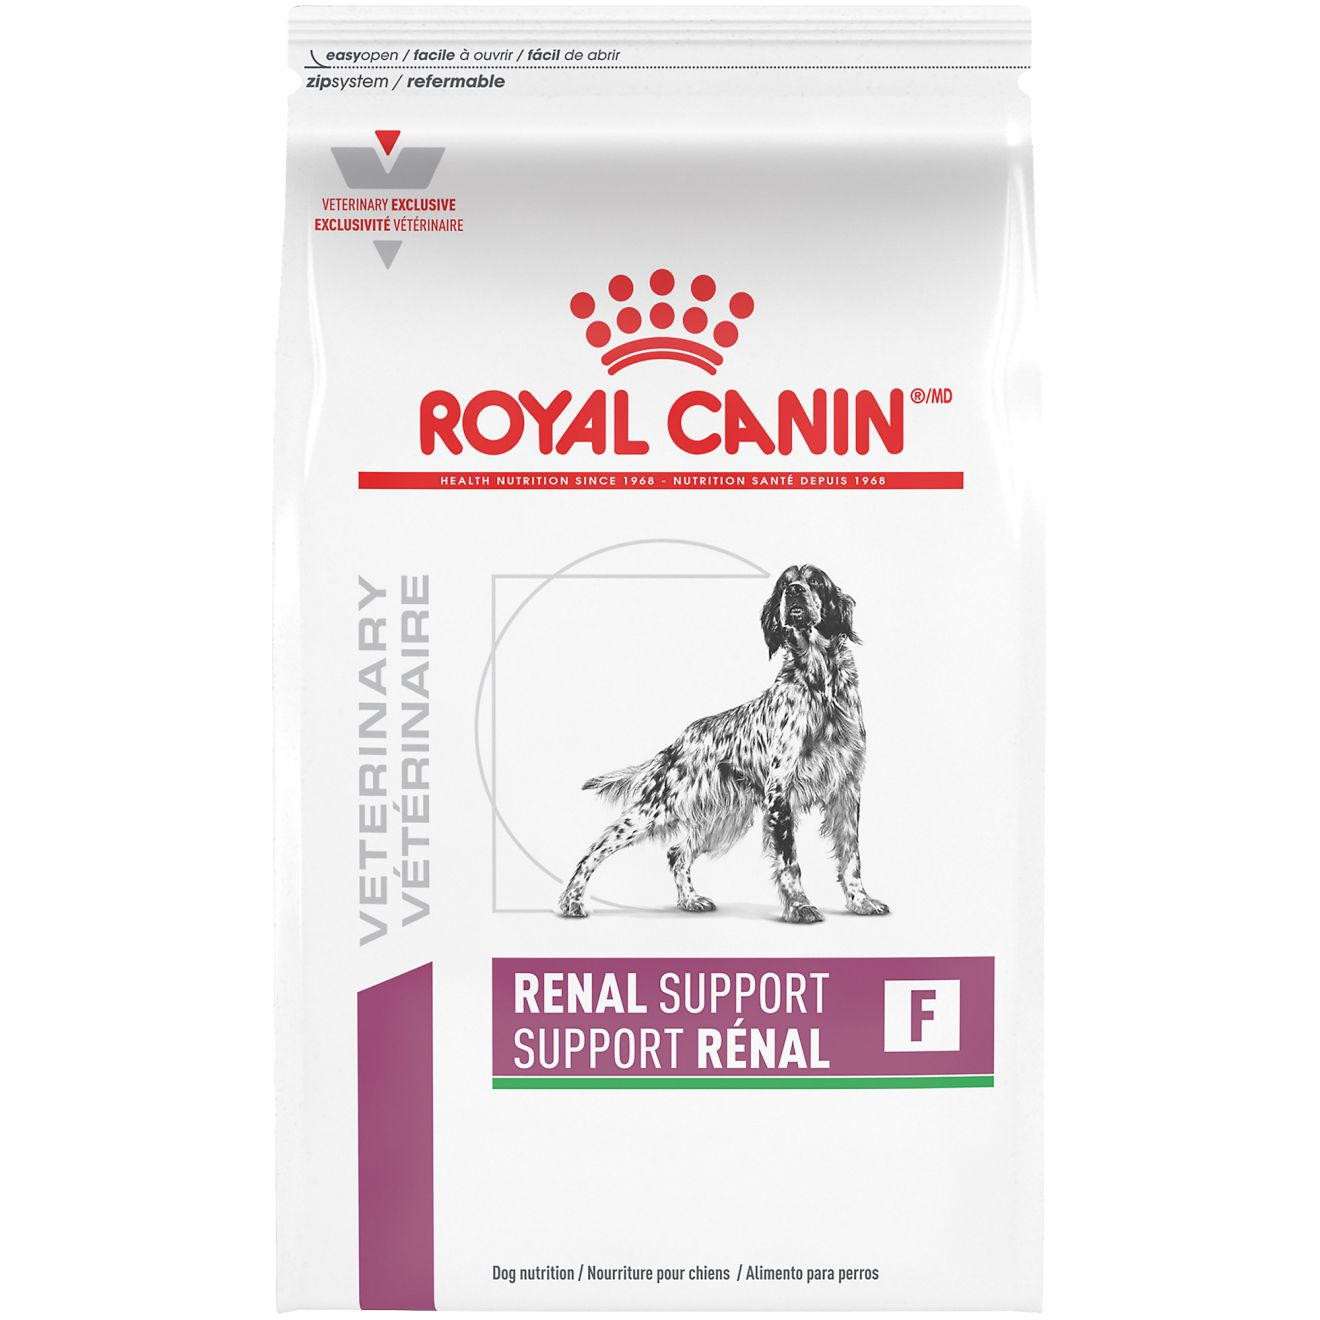 Canine Renal Support F